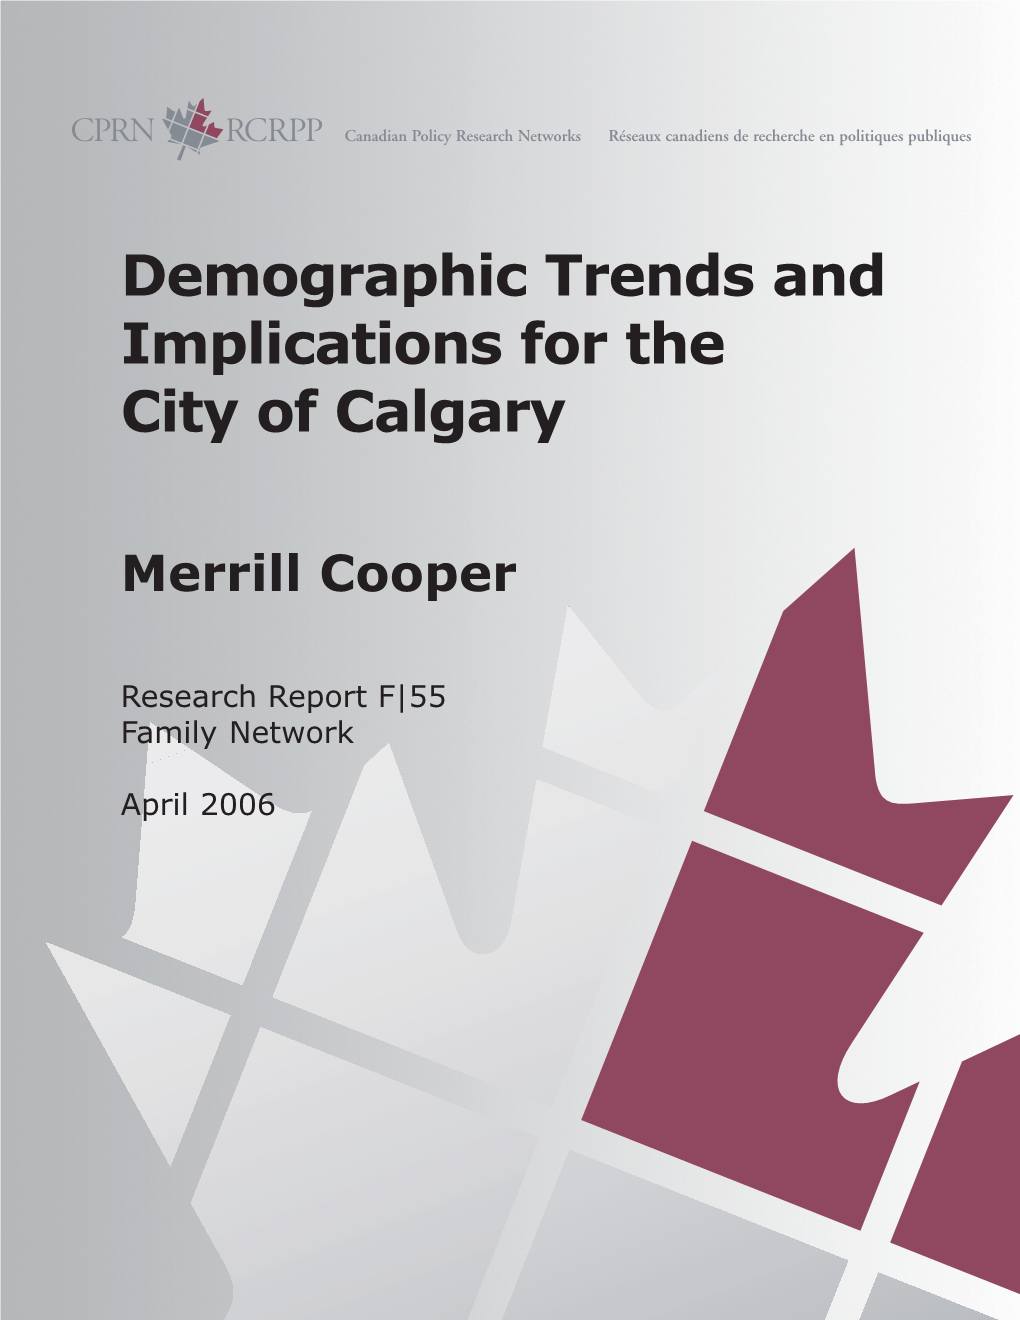 Demographic Trends and Implications for the City of Calgary